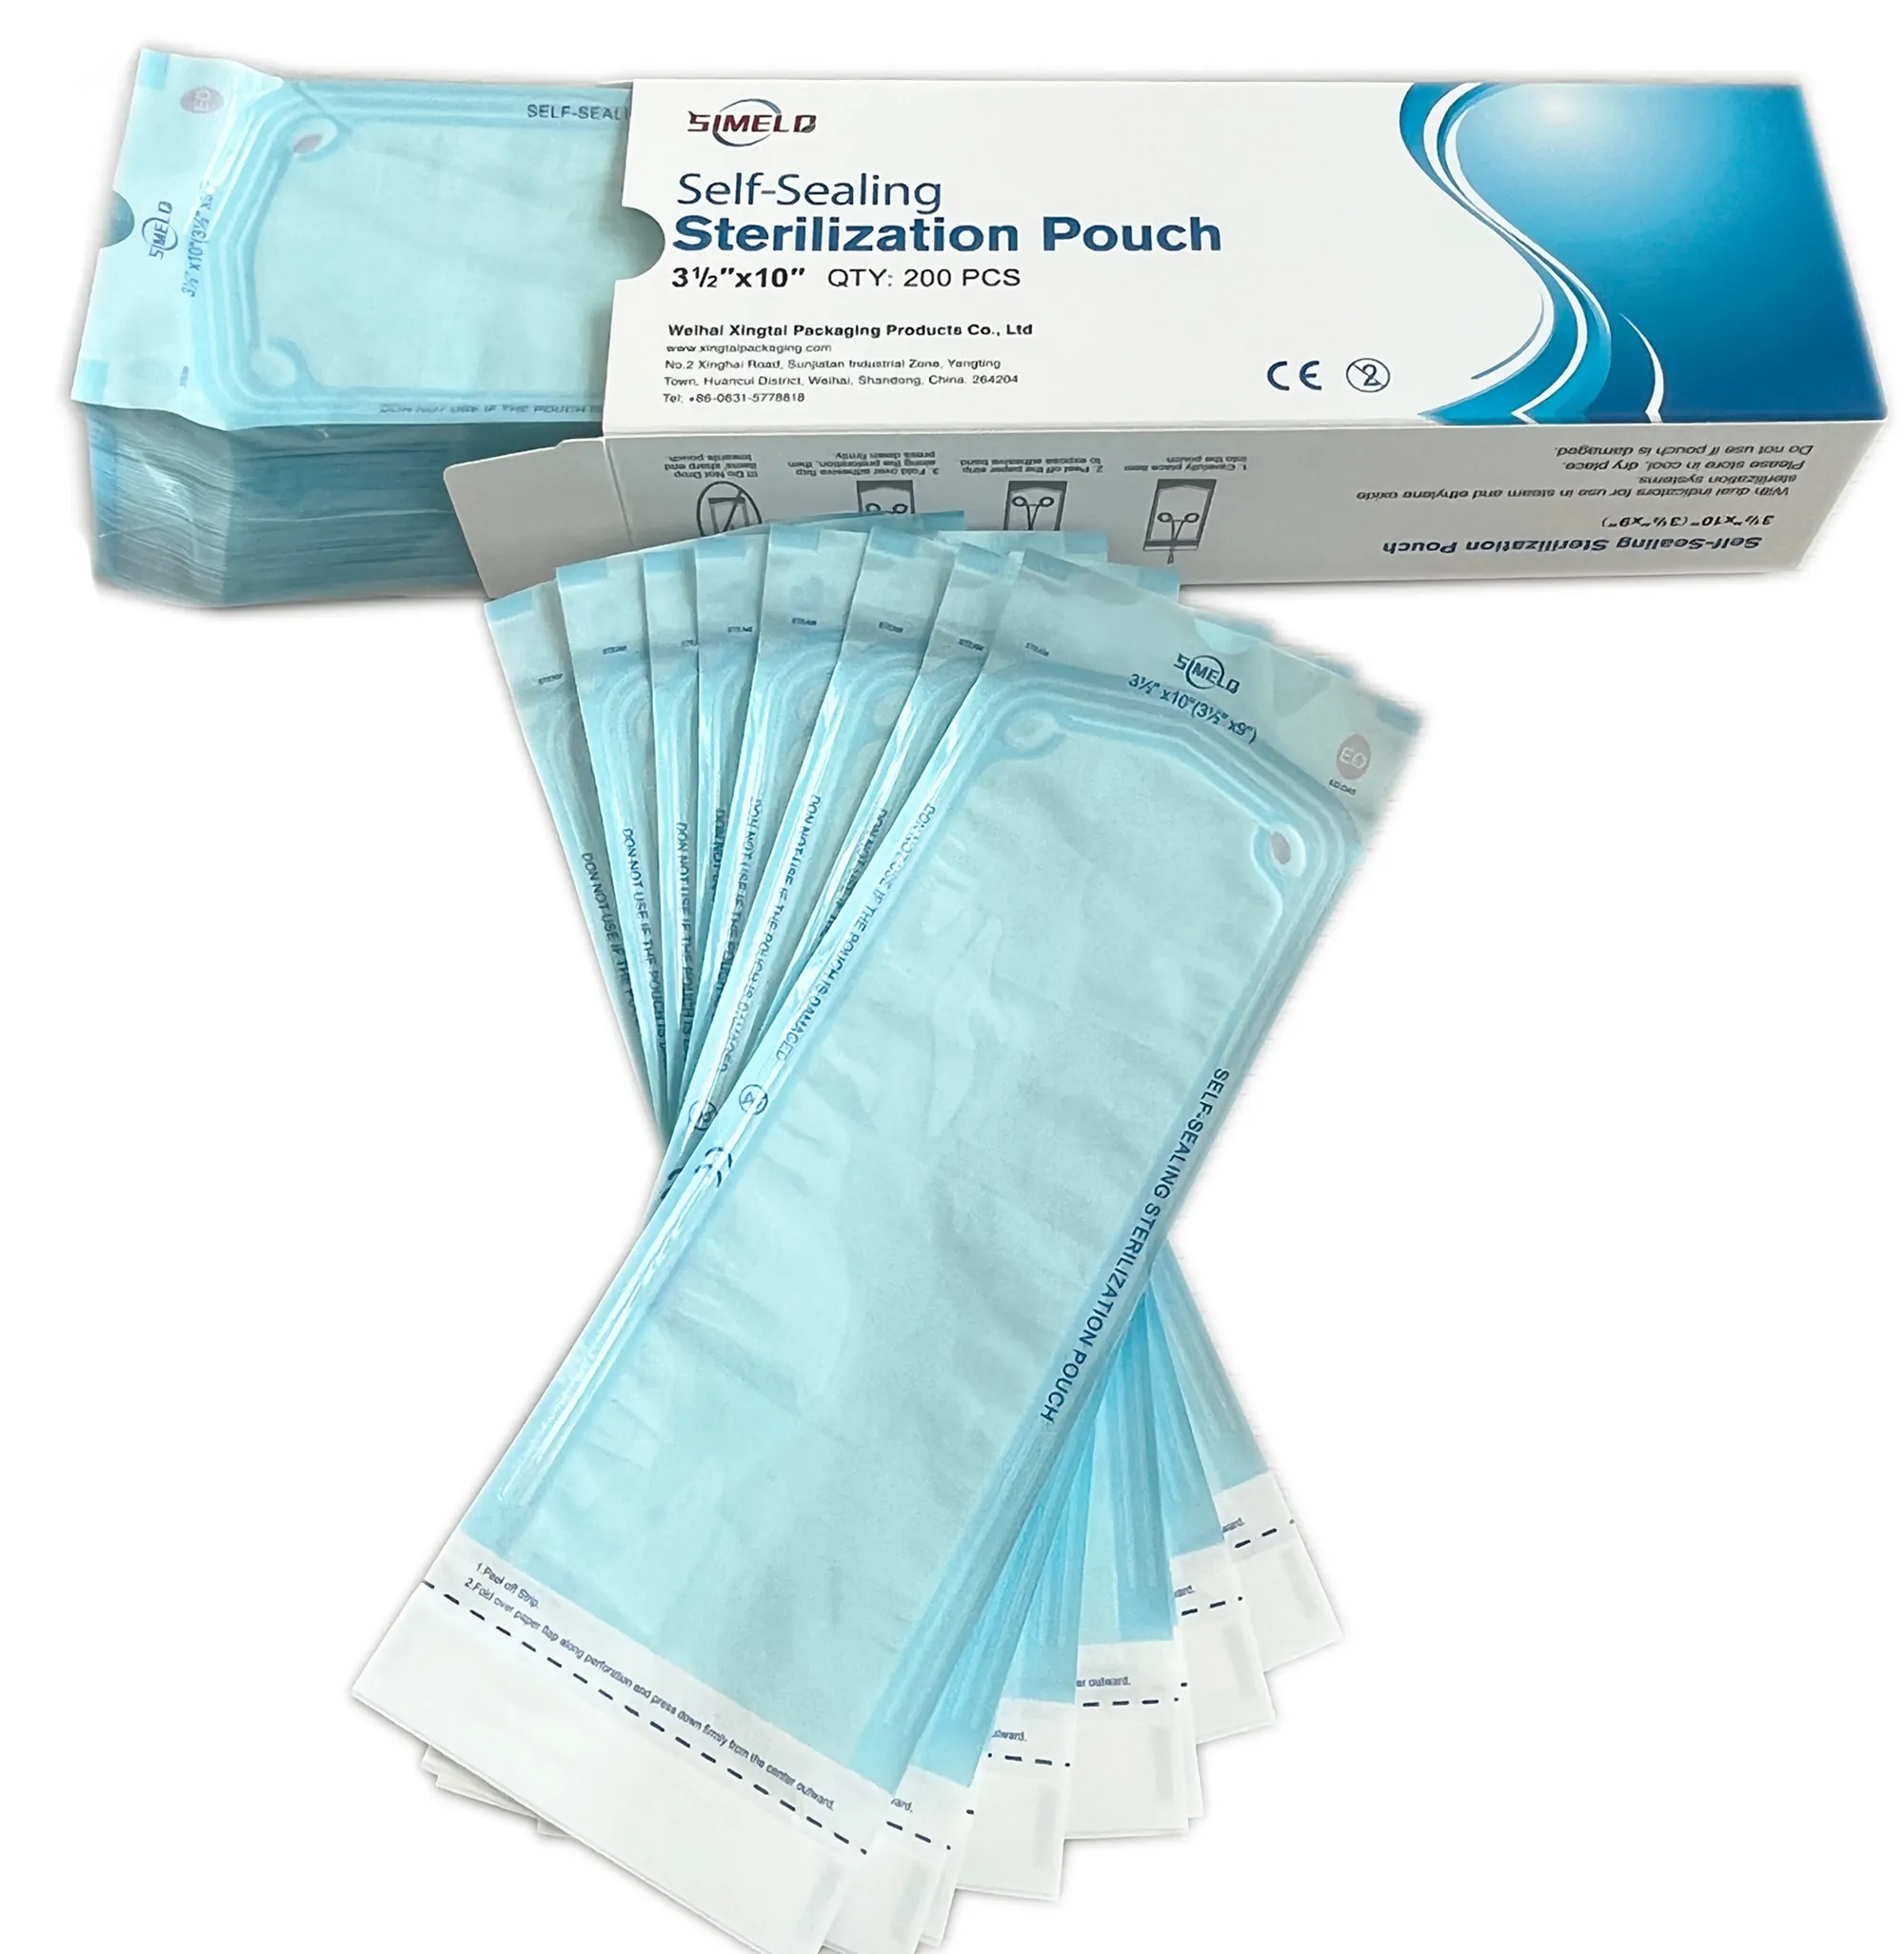 Self Sealing Sterilization Pouch Bag Clear Blue For 10x3.5in